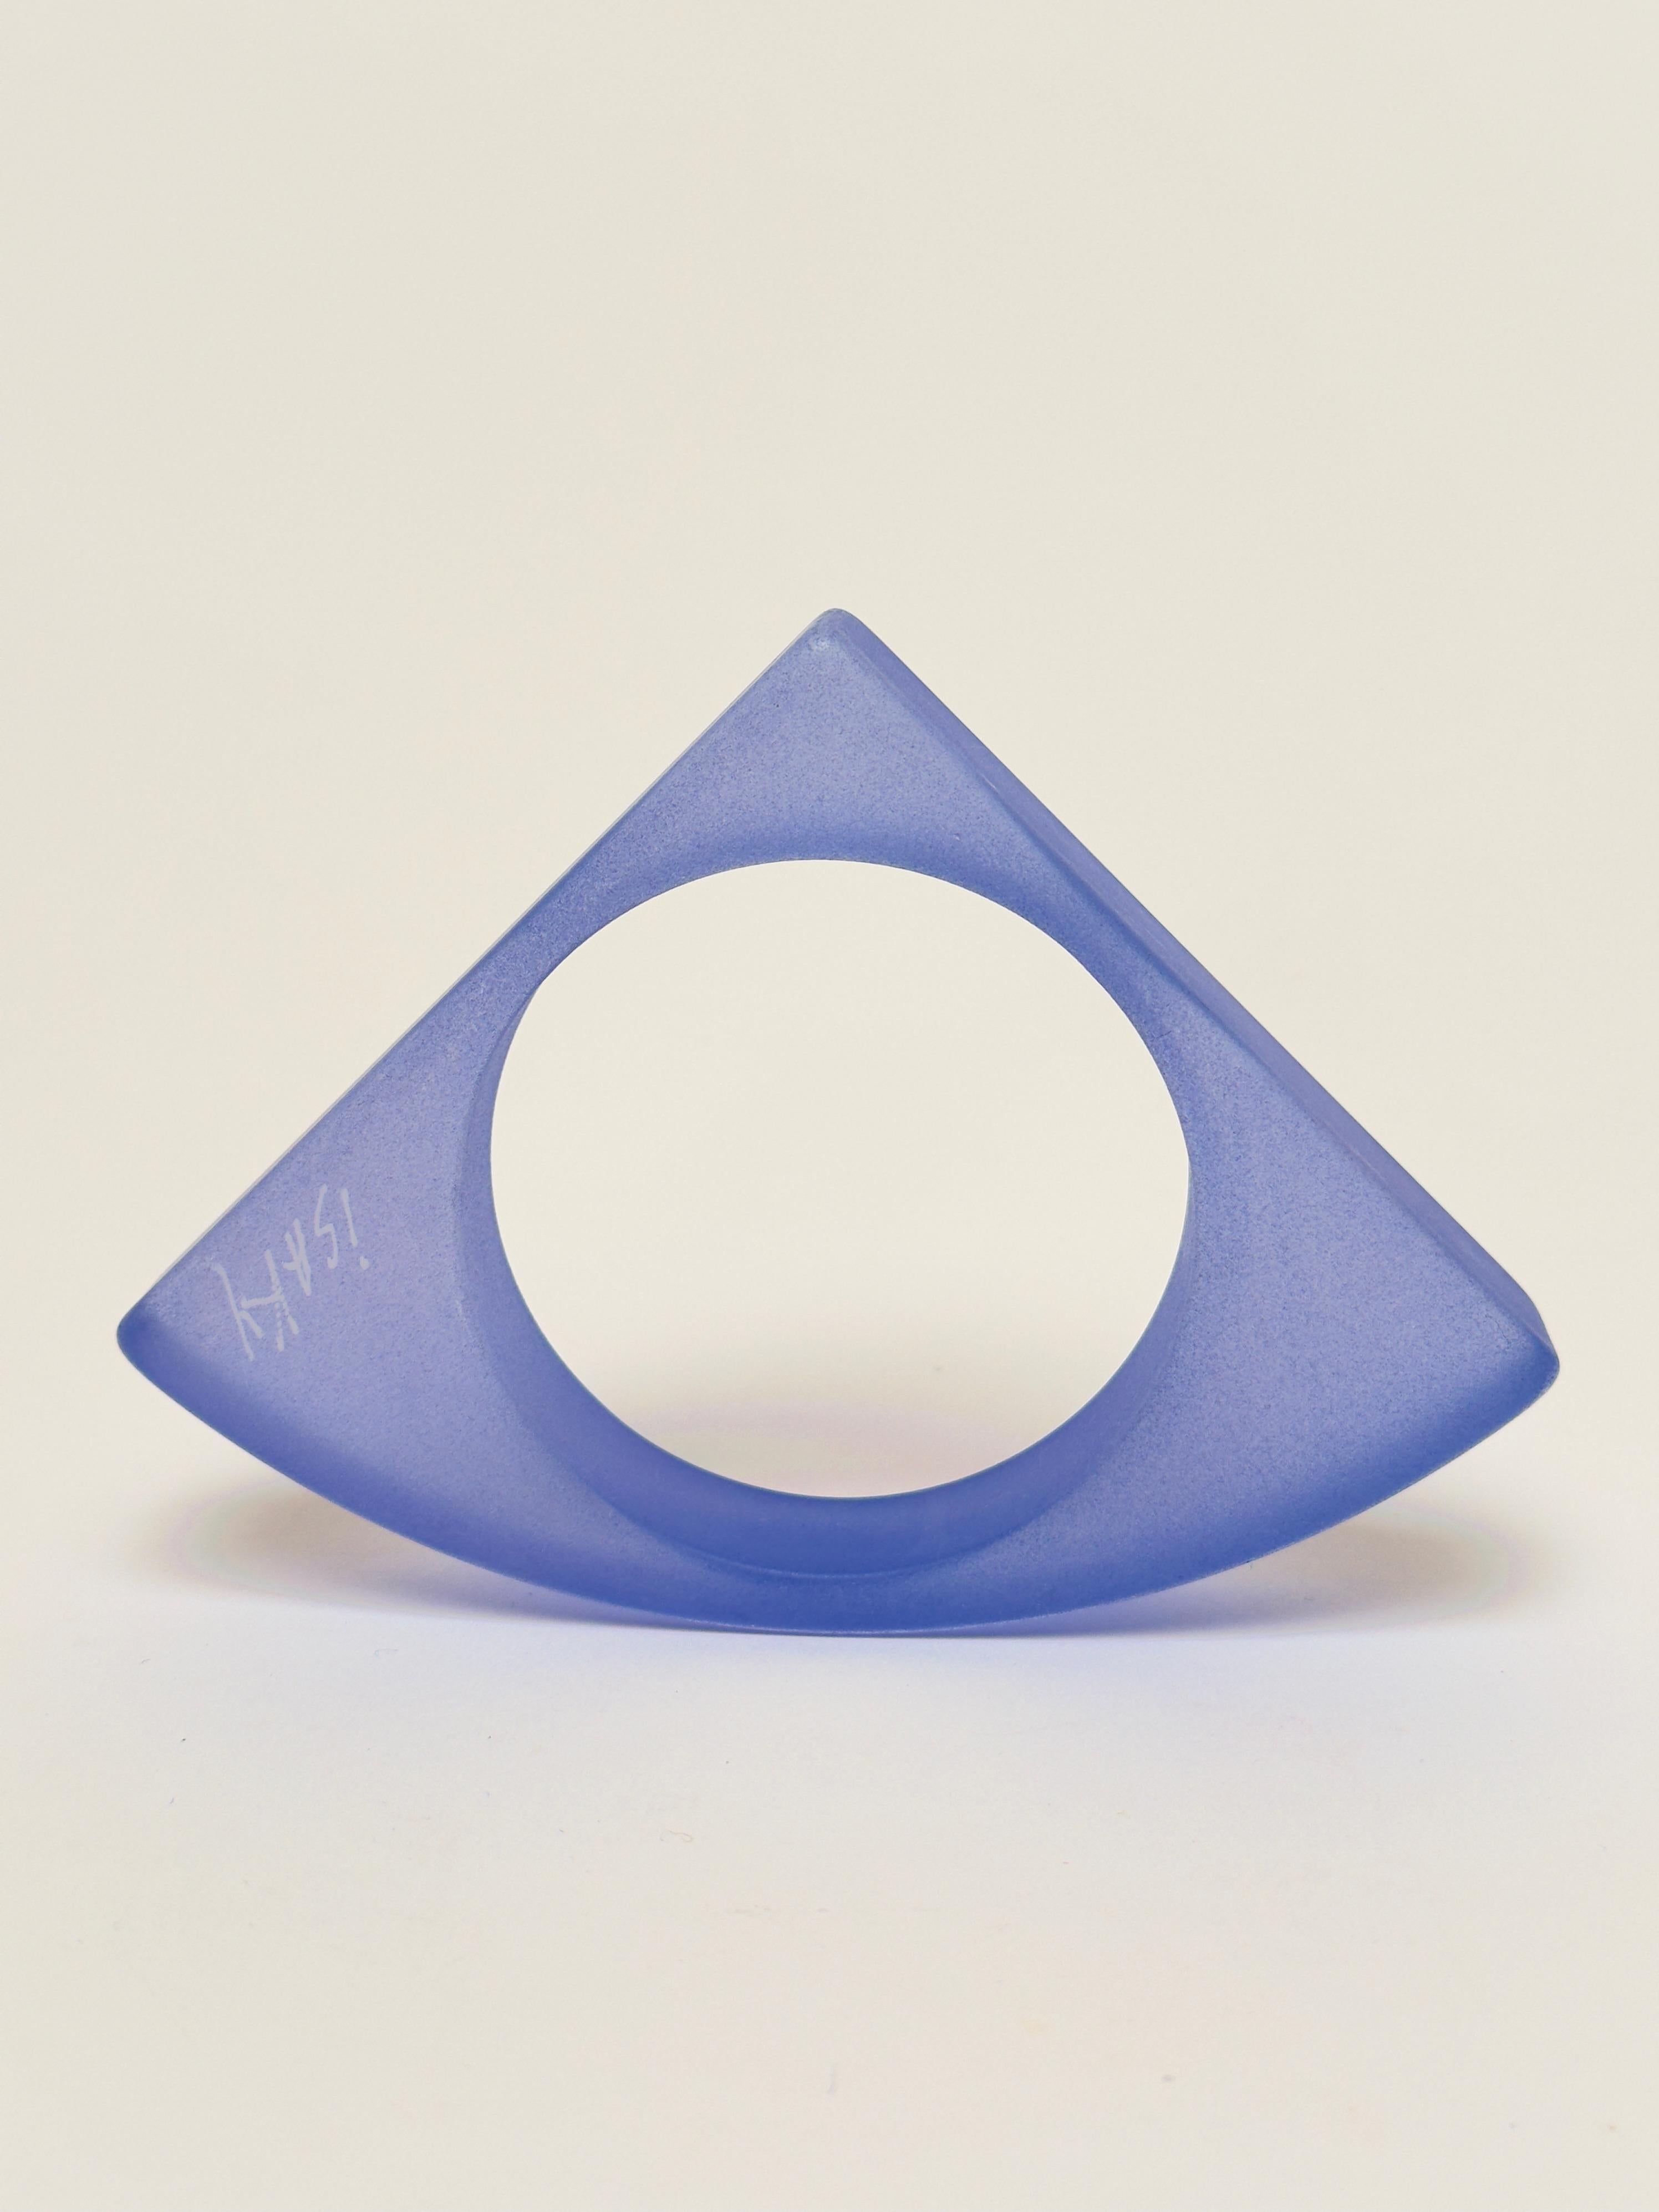 Half object, half jewel, this sculptural bangle in sandblasted resin bears the handwritten signature of the artist.

Measurements (cm) :
triangle's sides 9.8 
depth 2 
wrist (int. diam.) 6.5

Former engineer, Isaky settles his reputation as a jewel